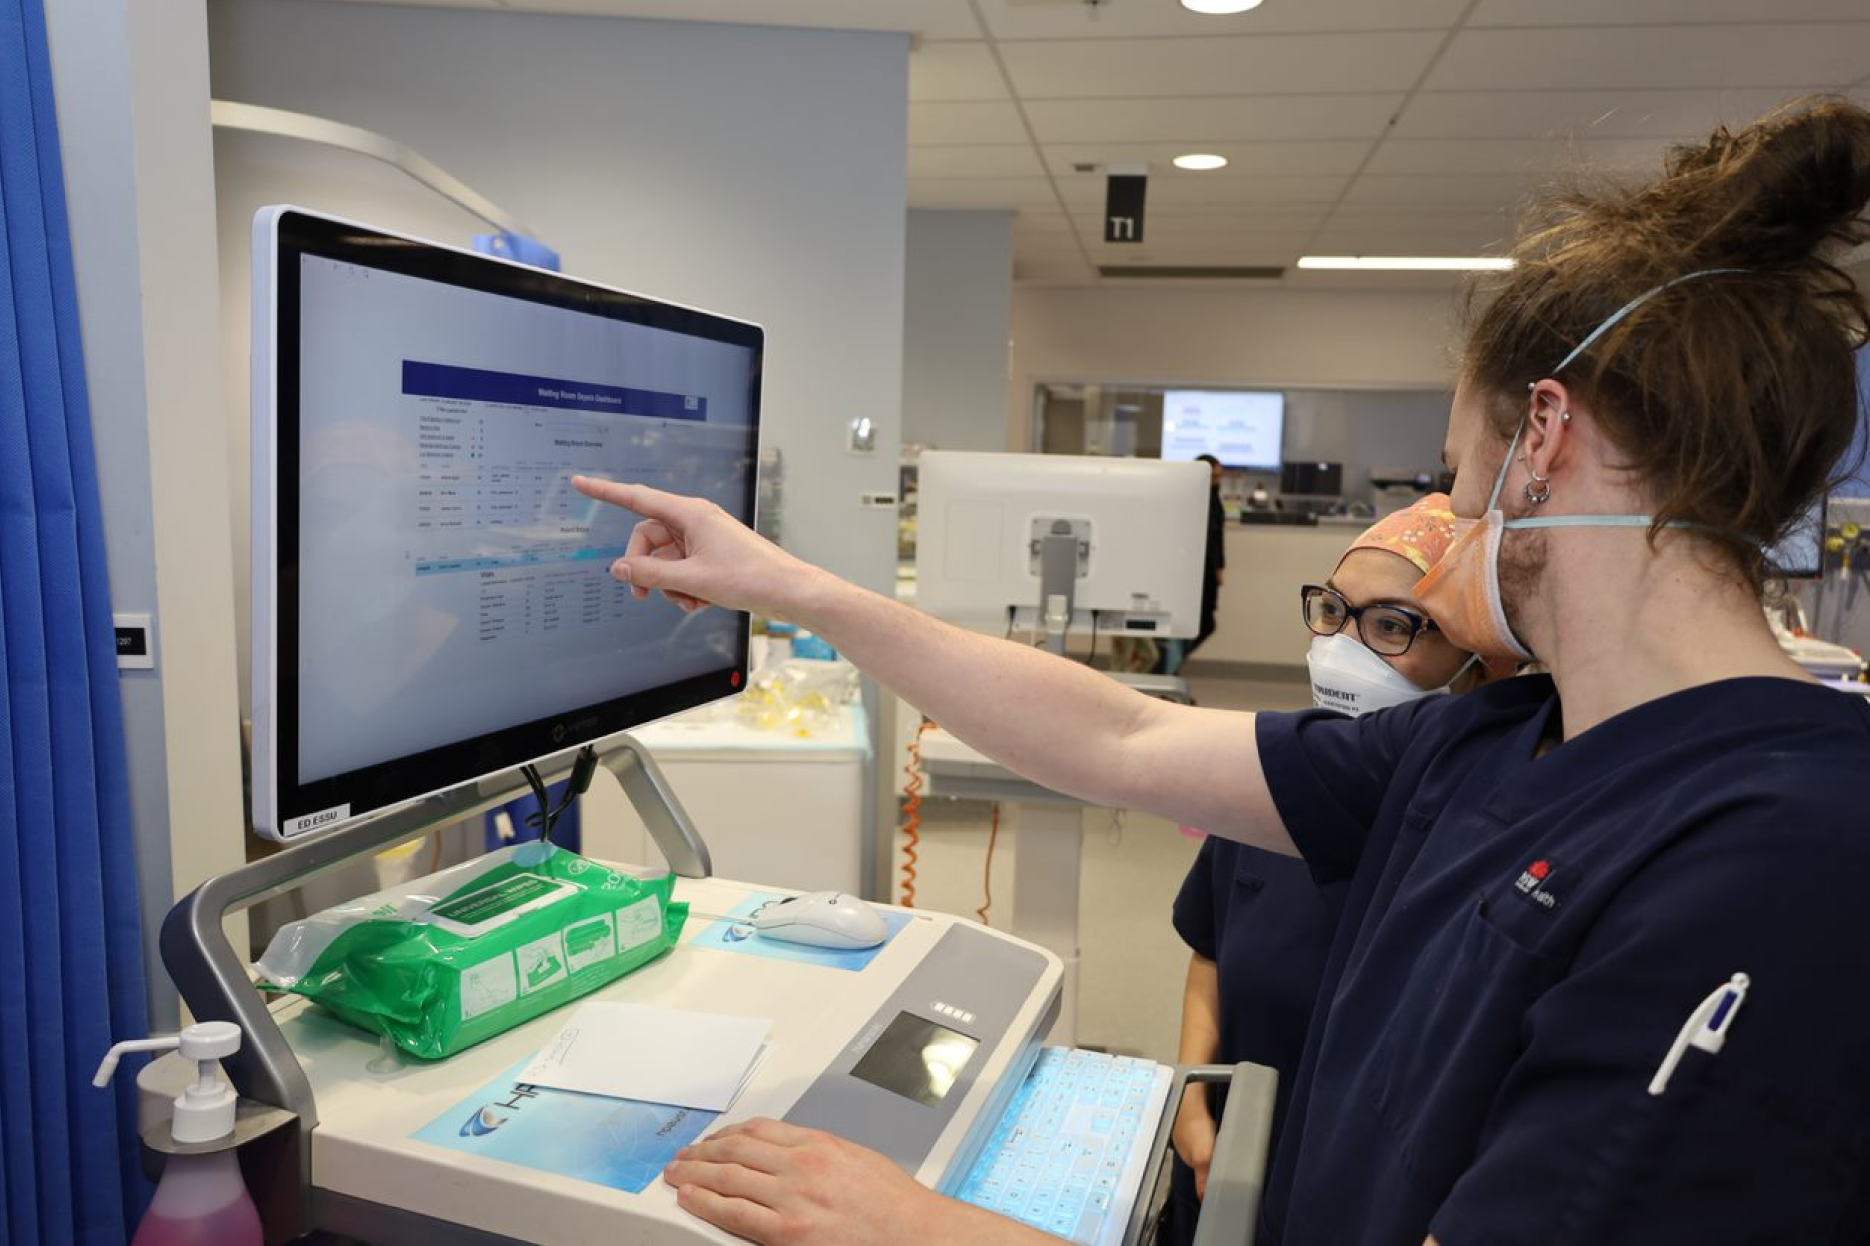 Two hospital clinicians pointing to a computer monitor.